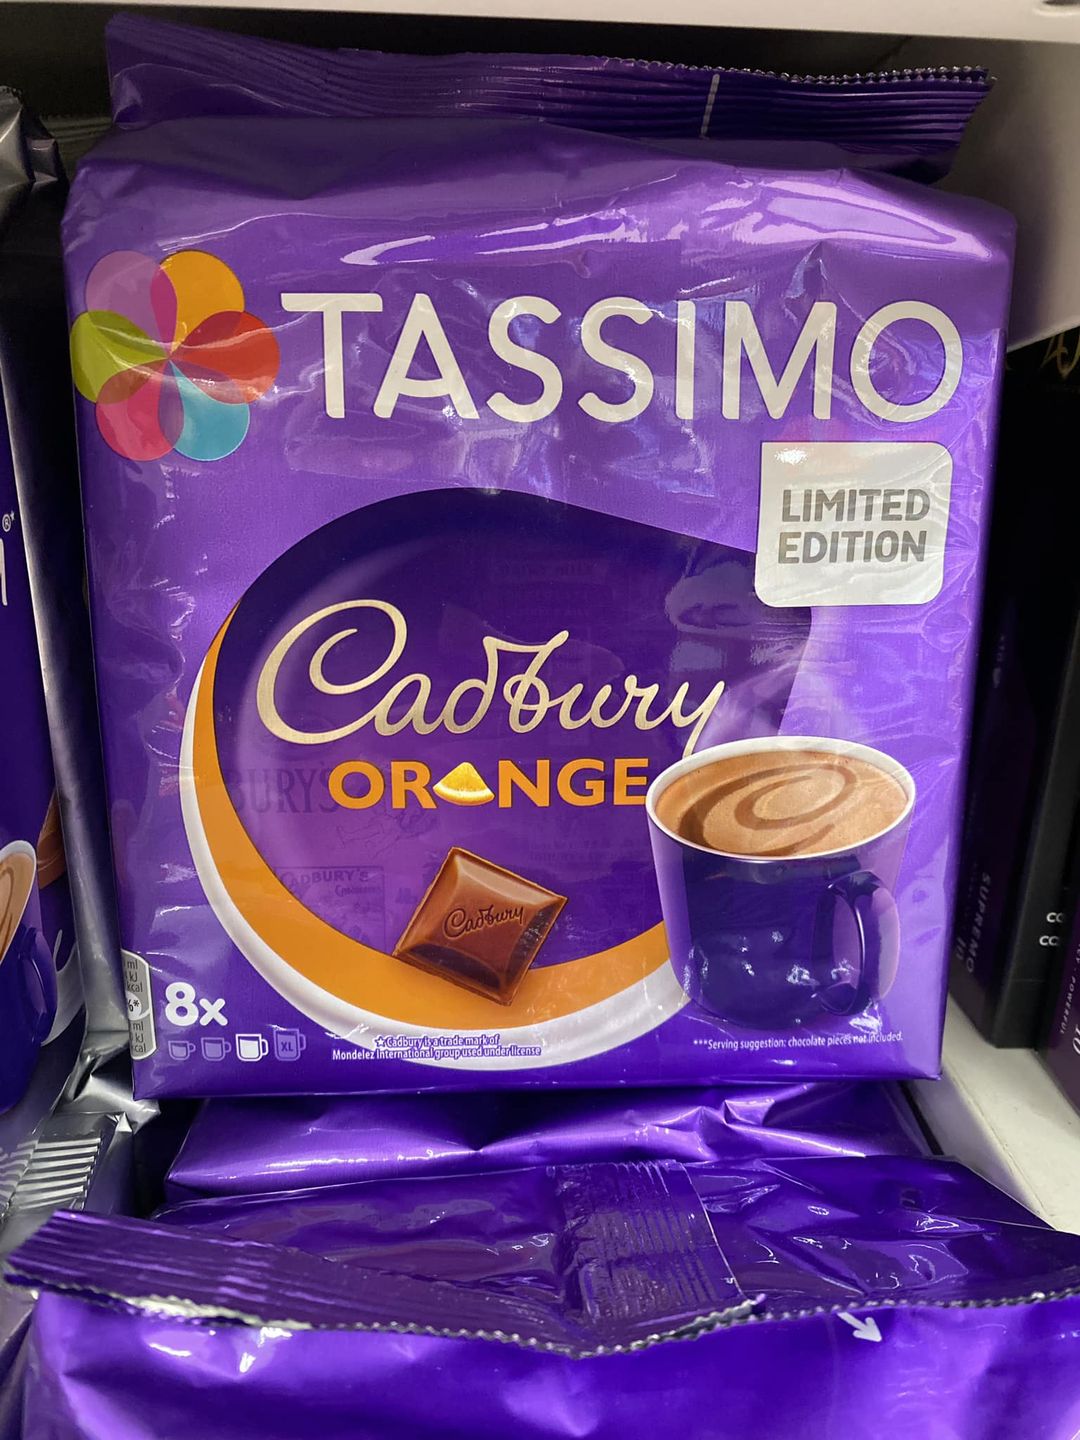 People are racing to get their hands on a pack of Tassimo's Cadbury chocolate orange flavoured pods